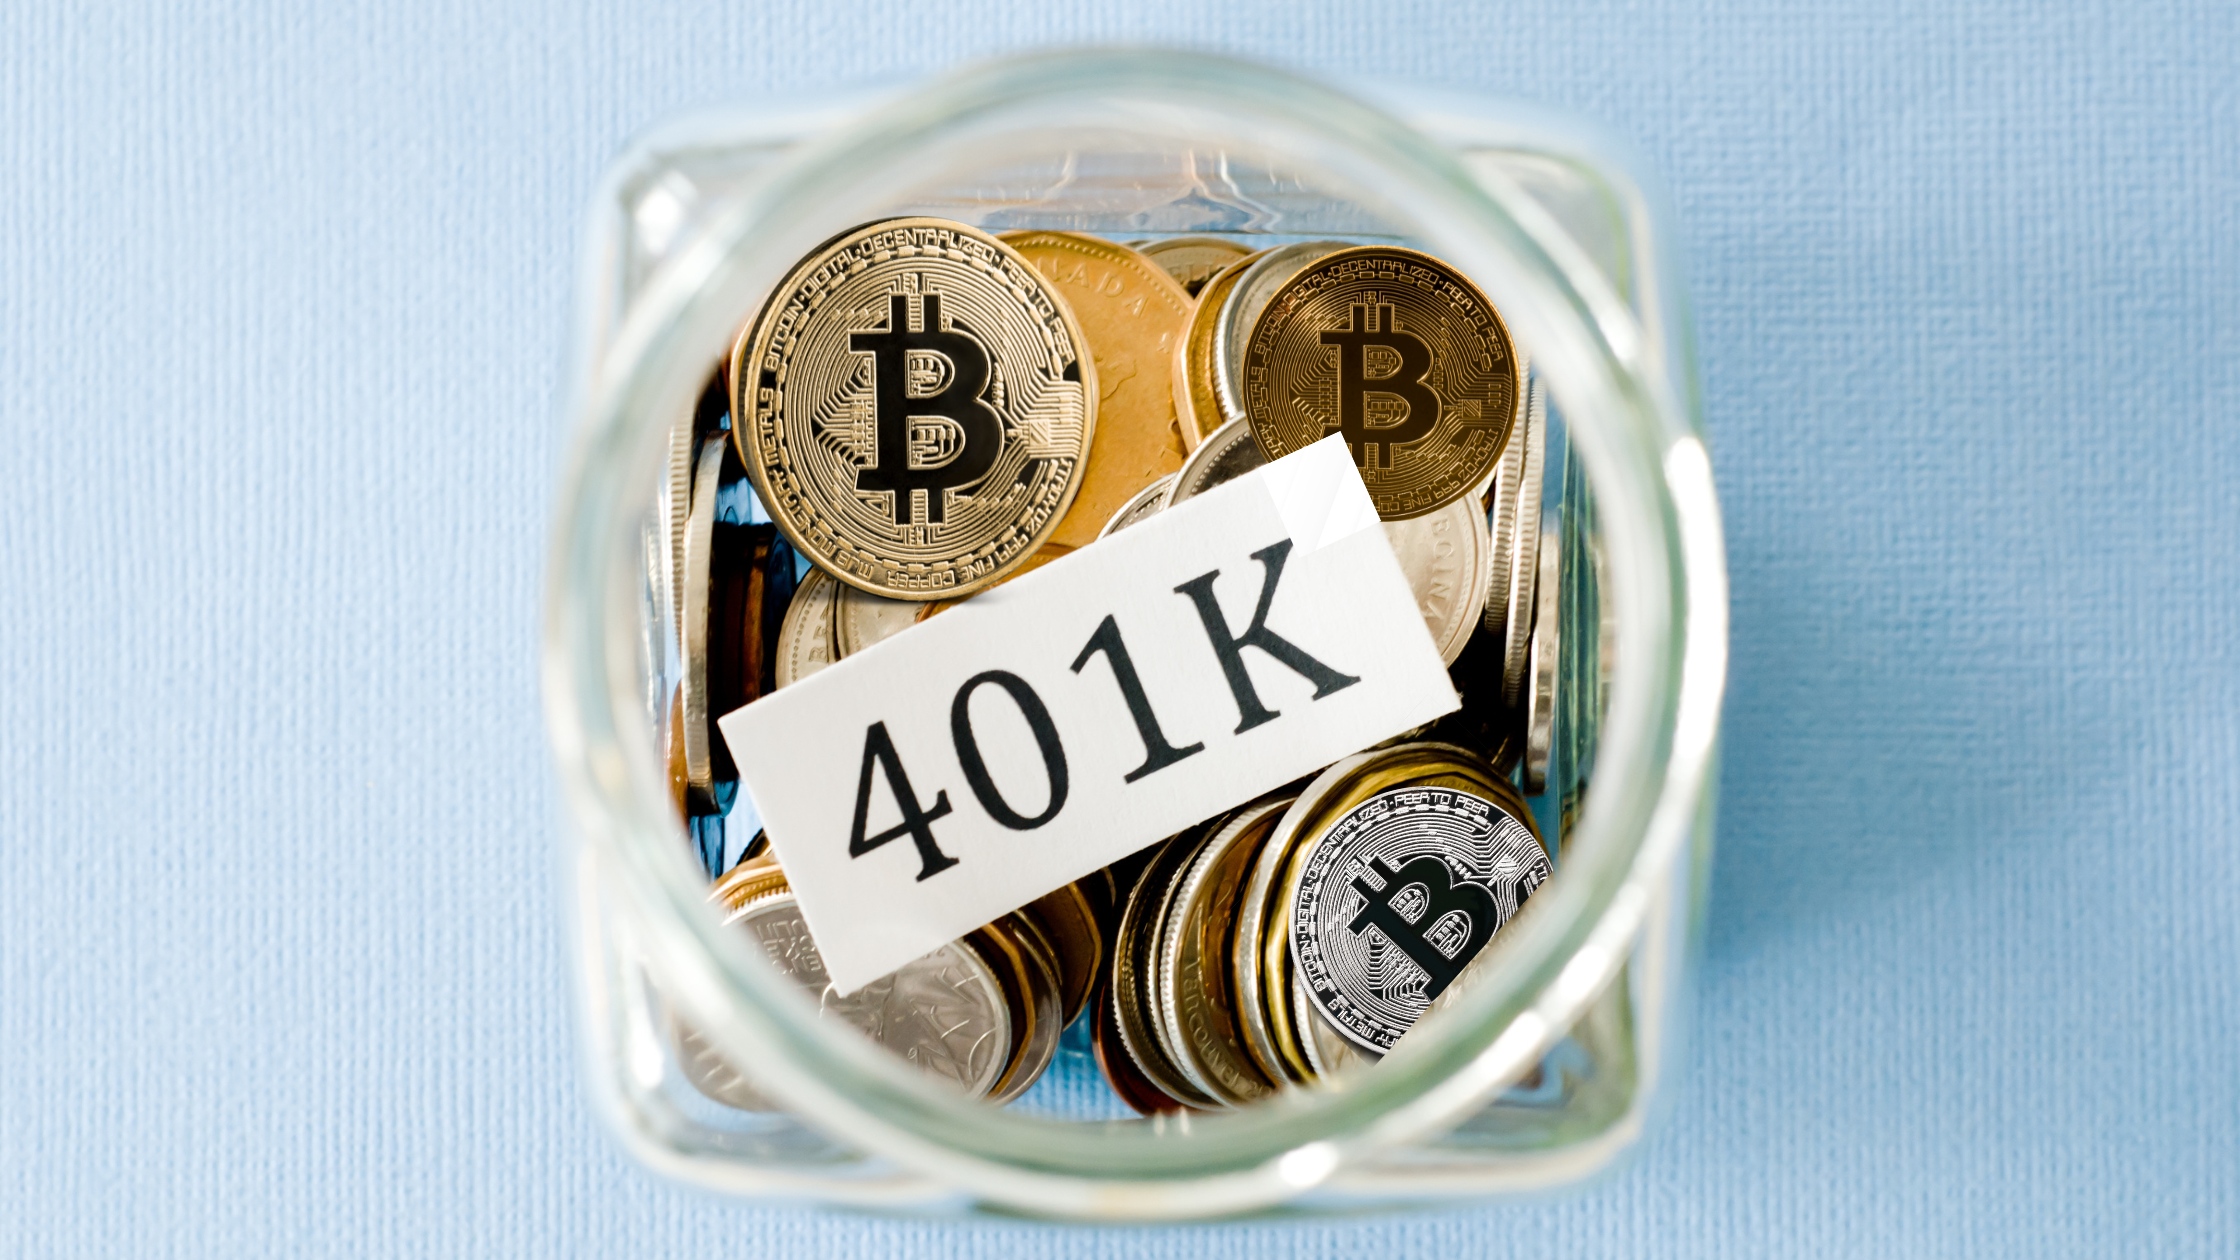 401(k) Investments